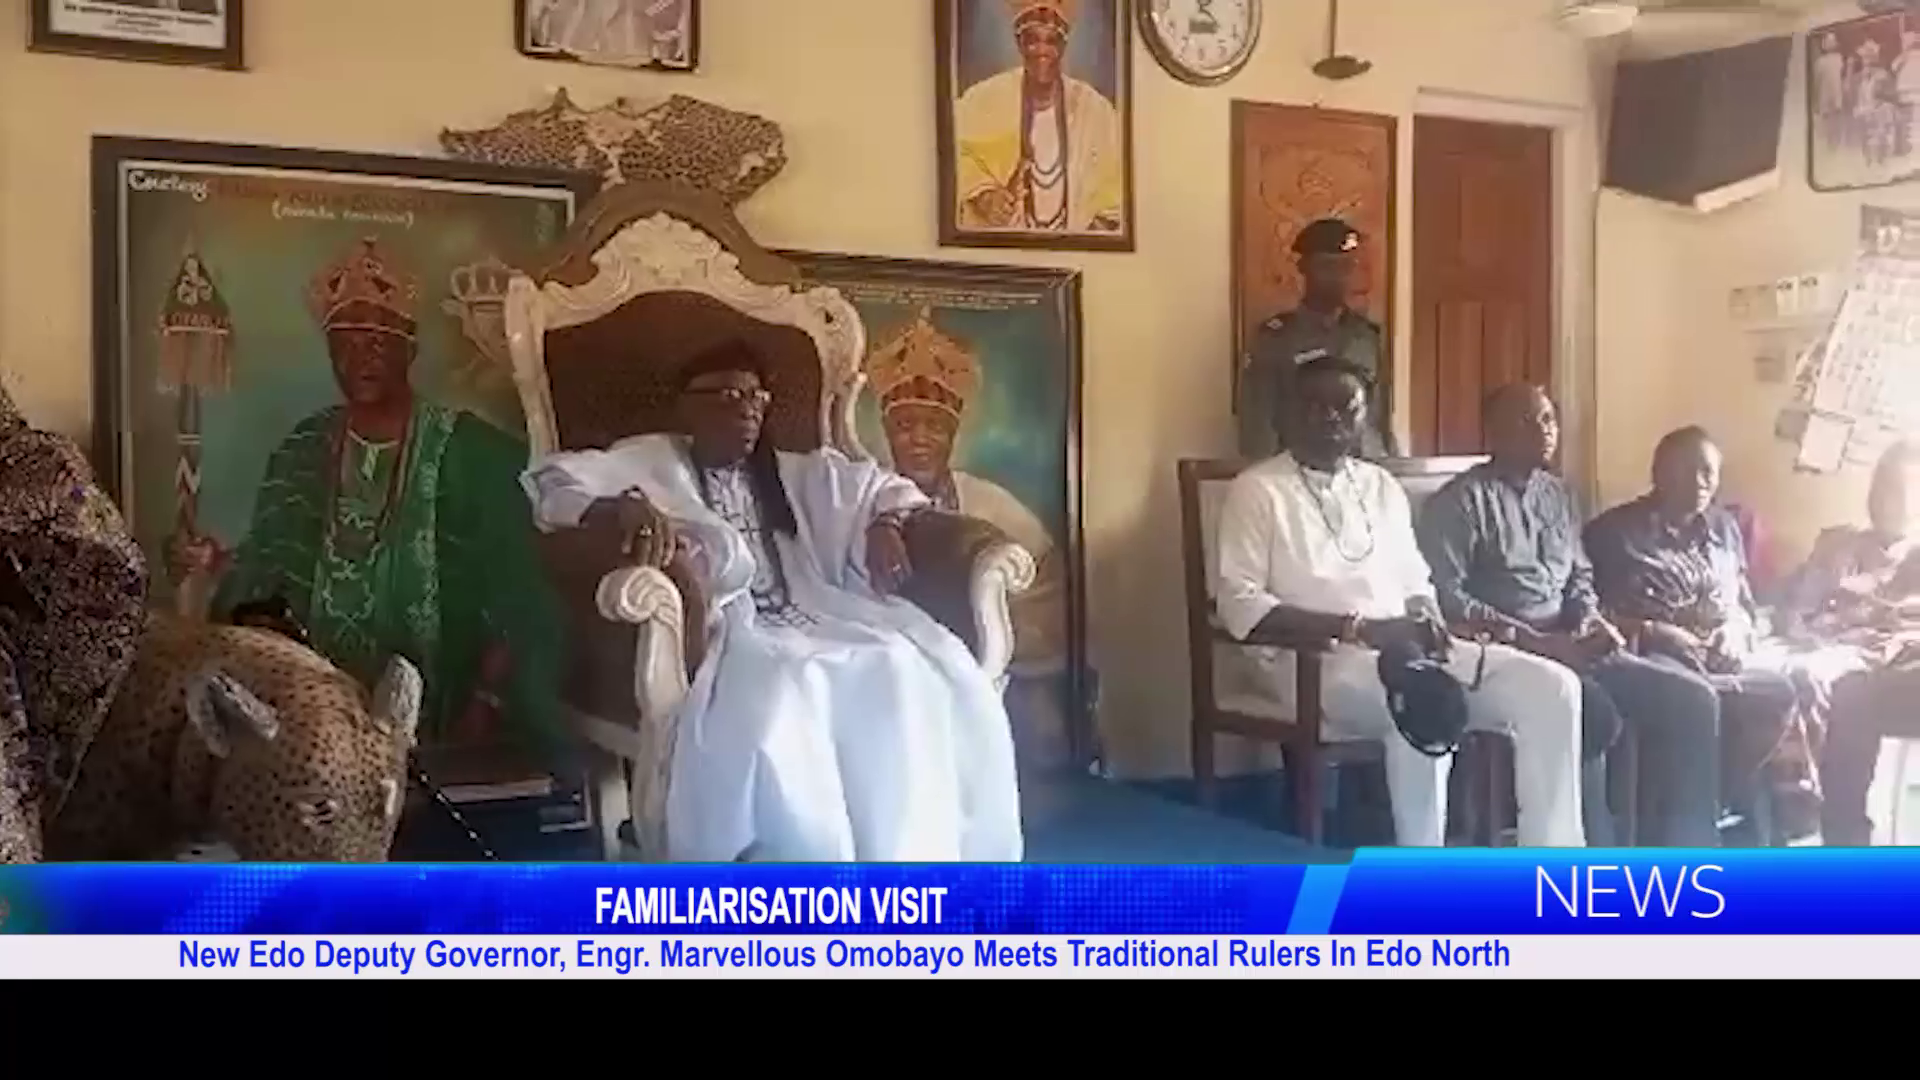 New Edo Deputy Governor, Engr. Marvellous Omobayo Meets Traditional Rulers In Edo North